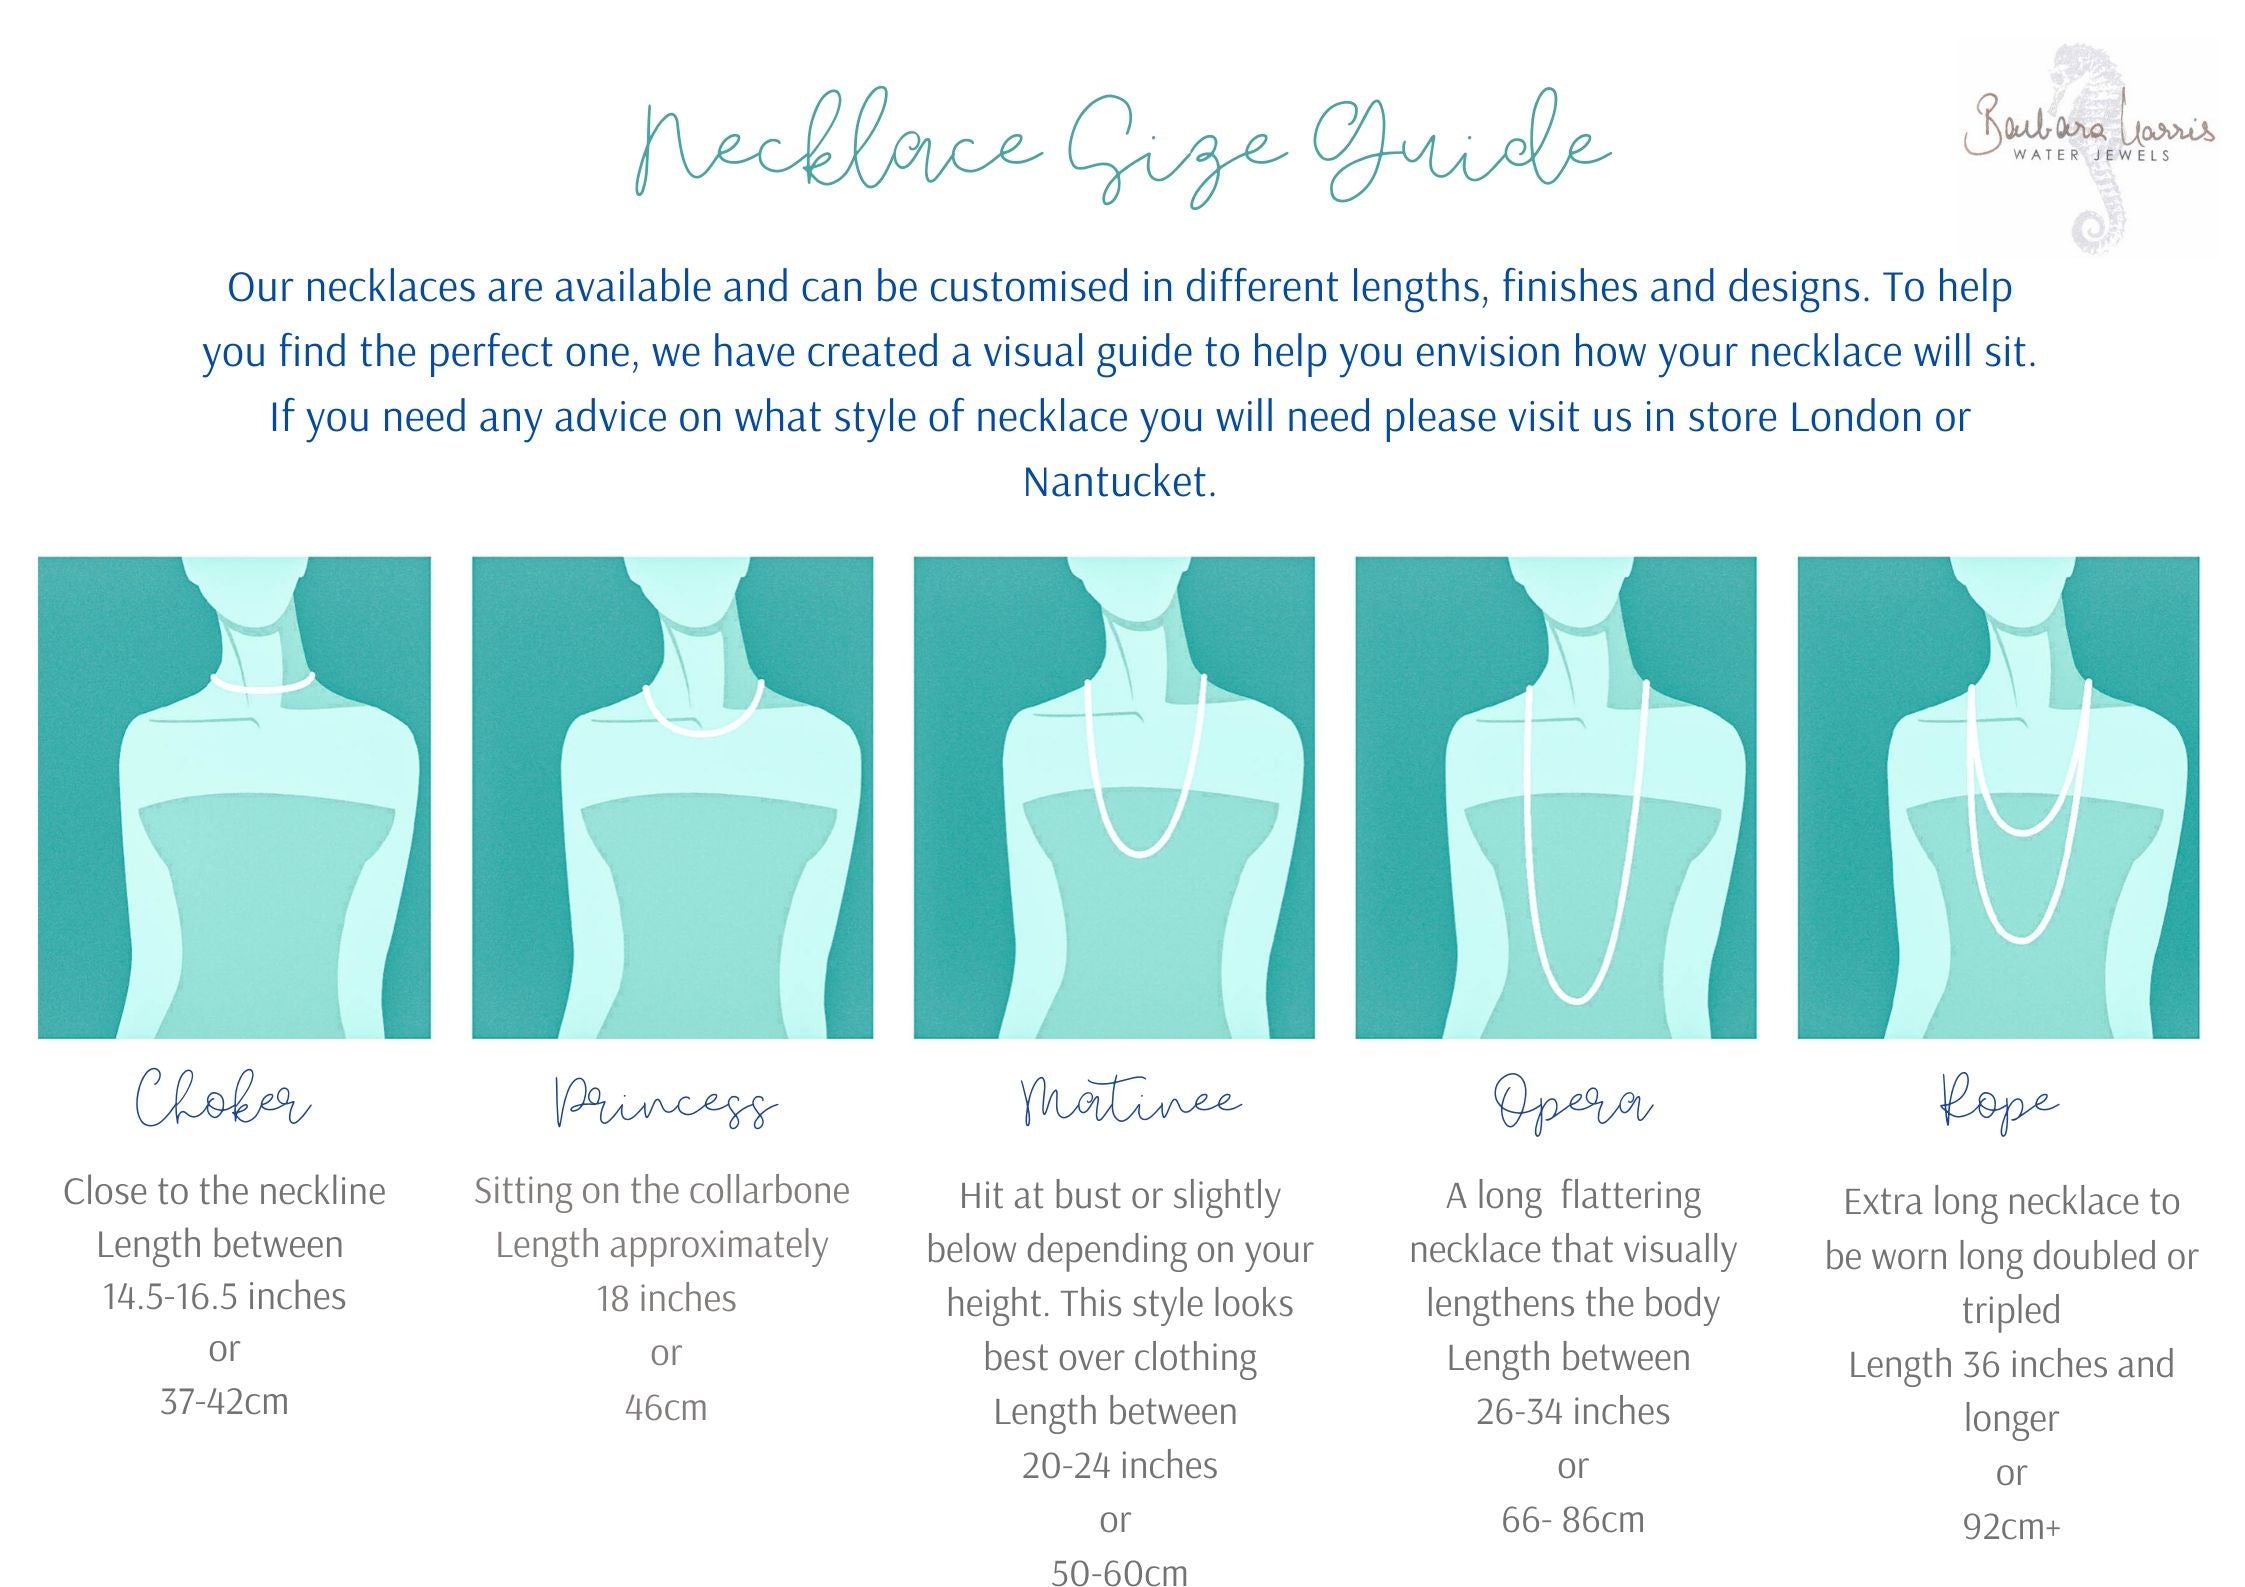 Necklace size guide